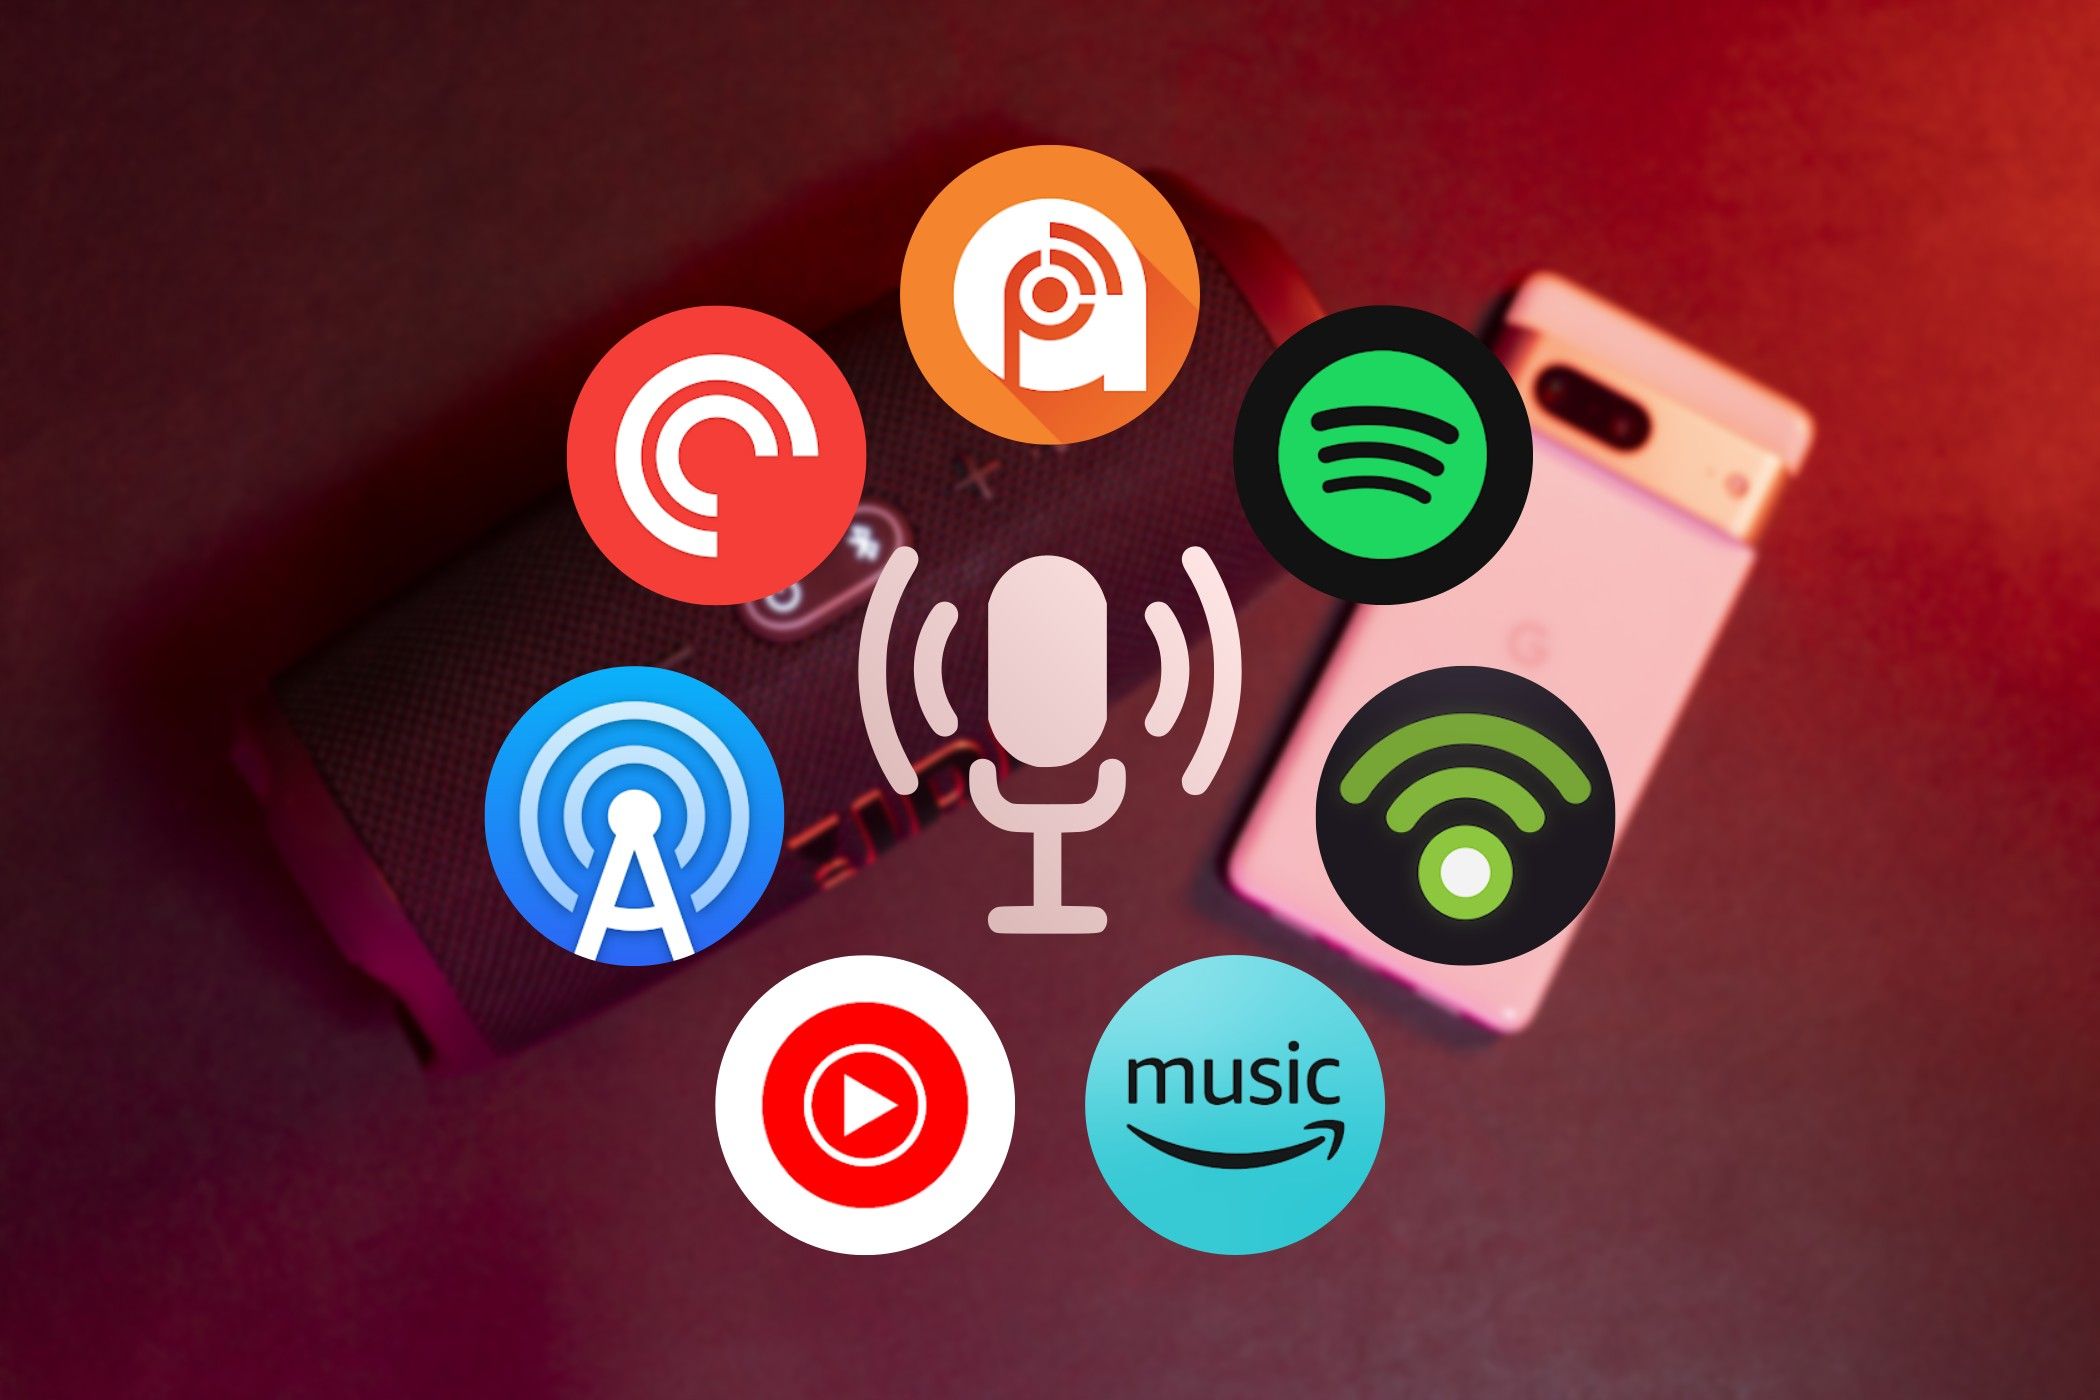 Android podcast app icons.